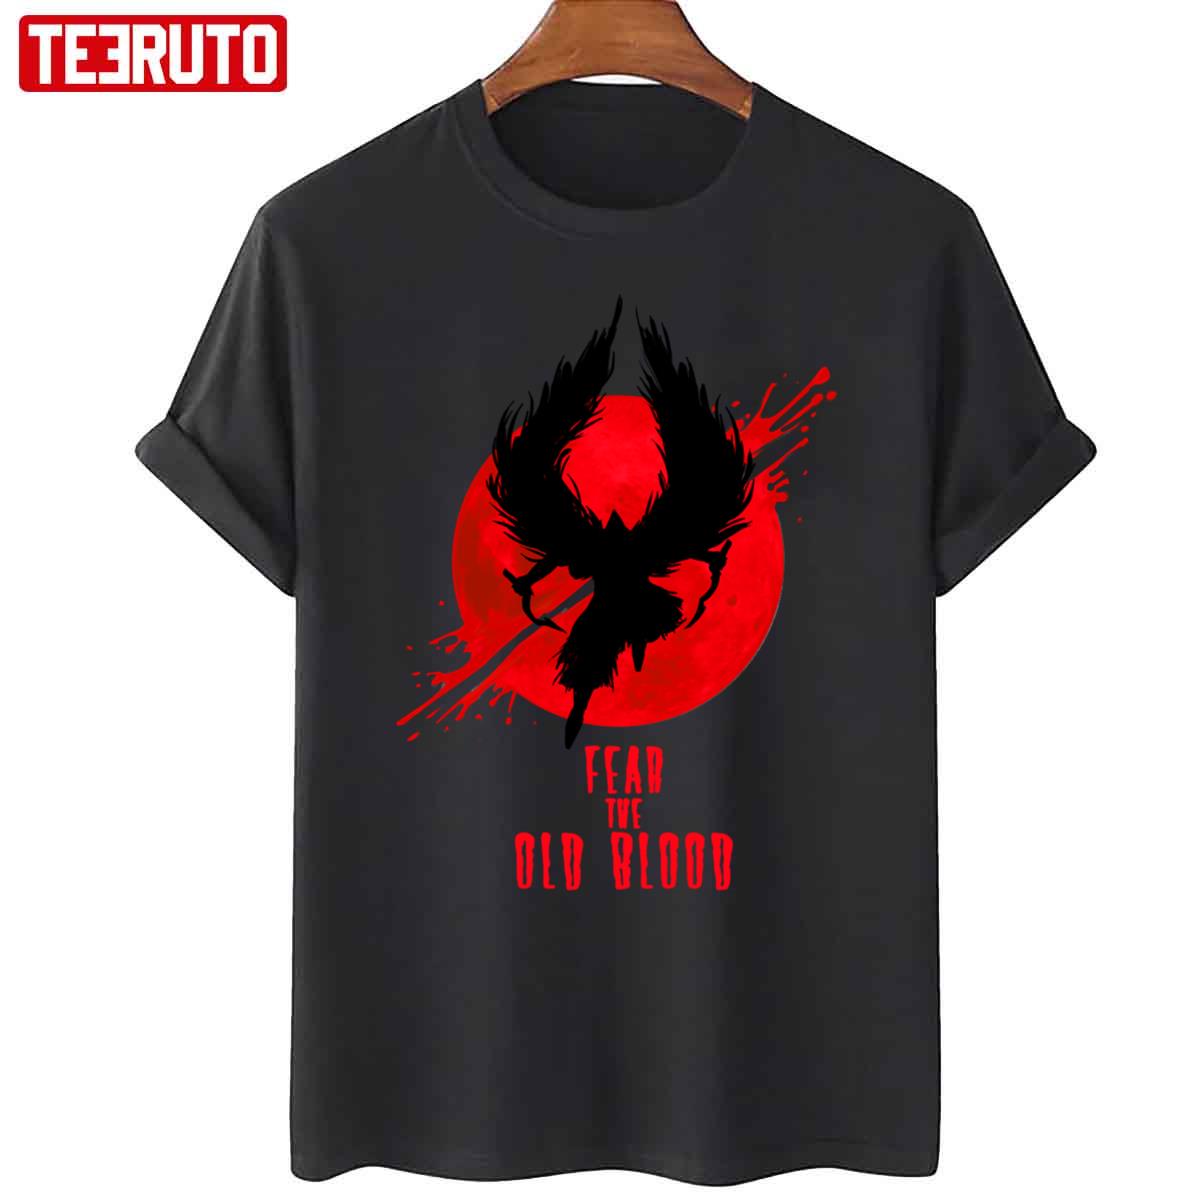 Fear The Old Blood Artwork Unisex T-Shirt